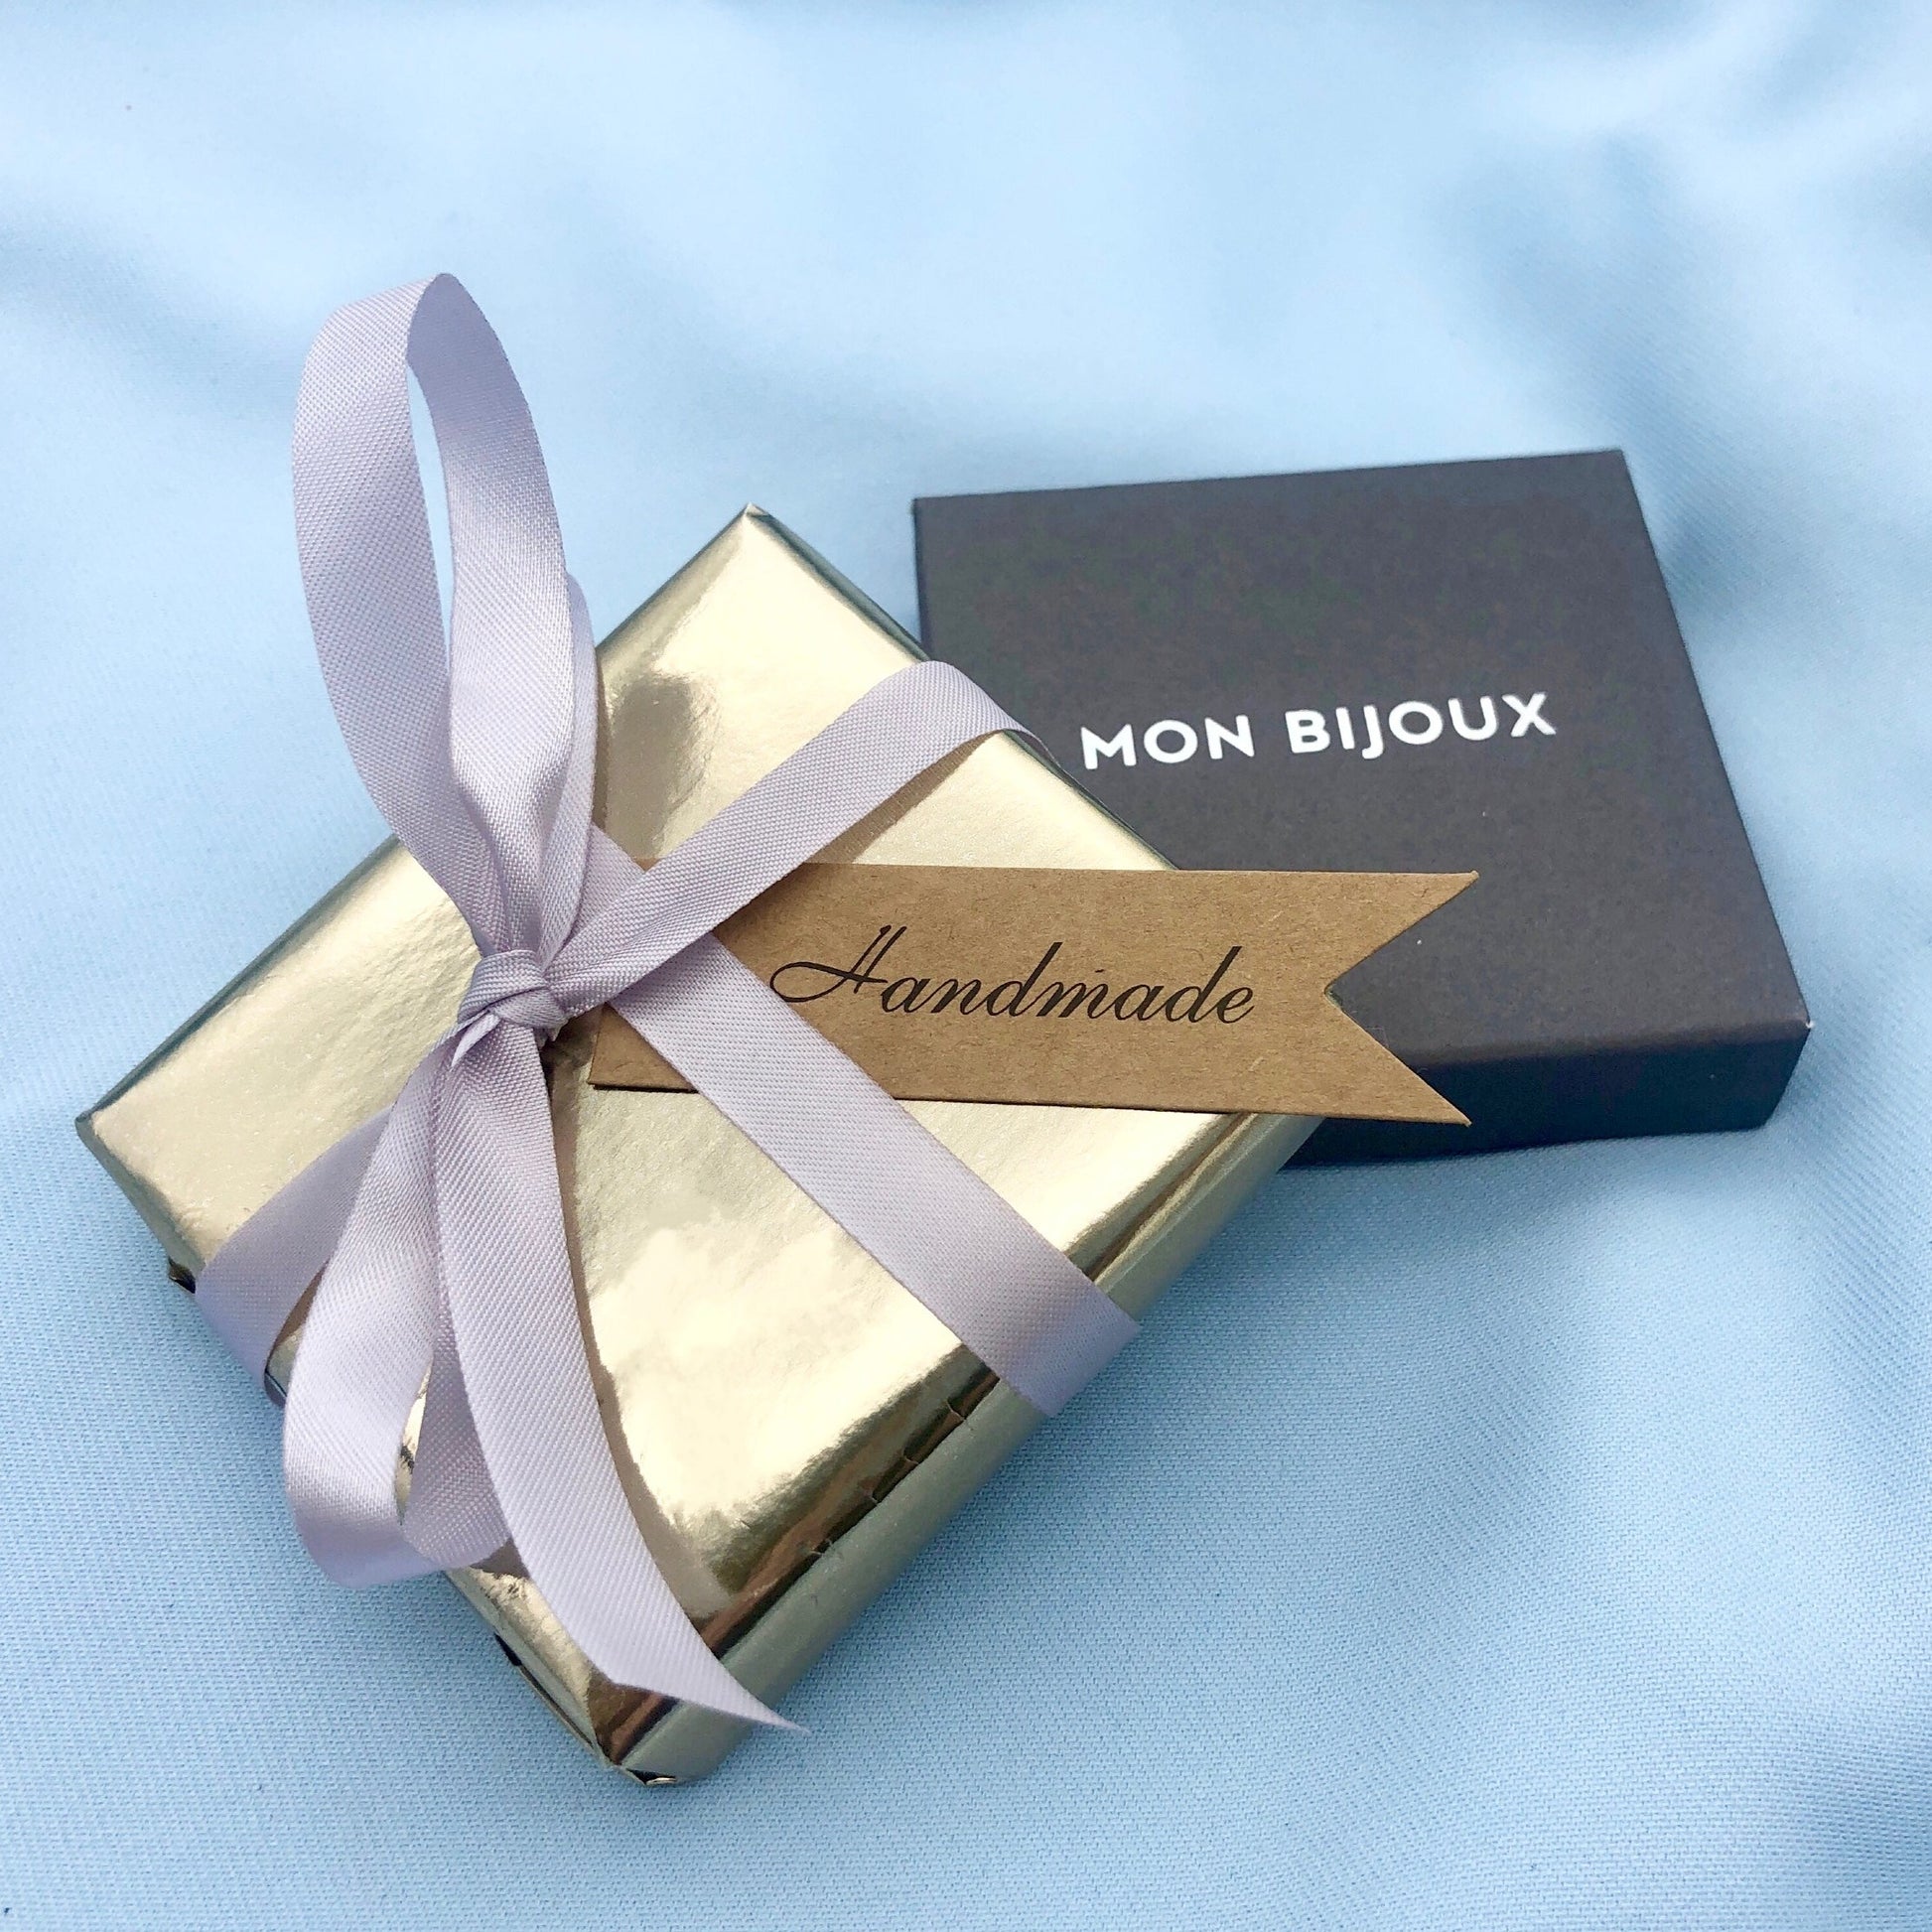 Mon Bijoux eco-friendly packaging used for silver bangles are made using recycled boxes